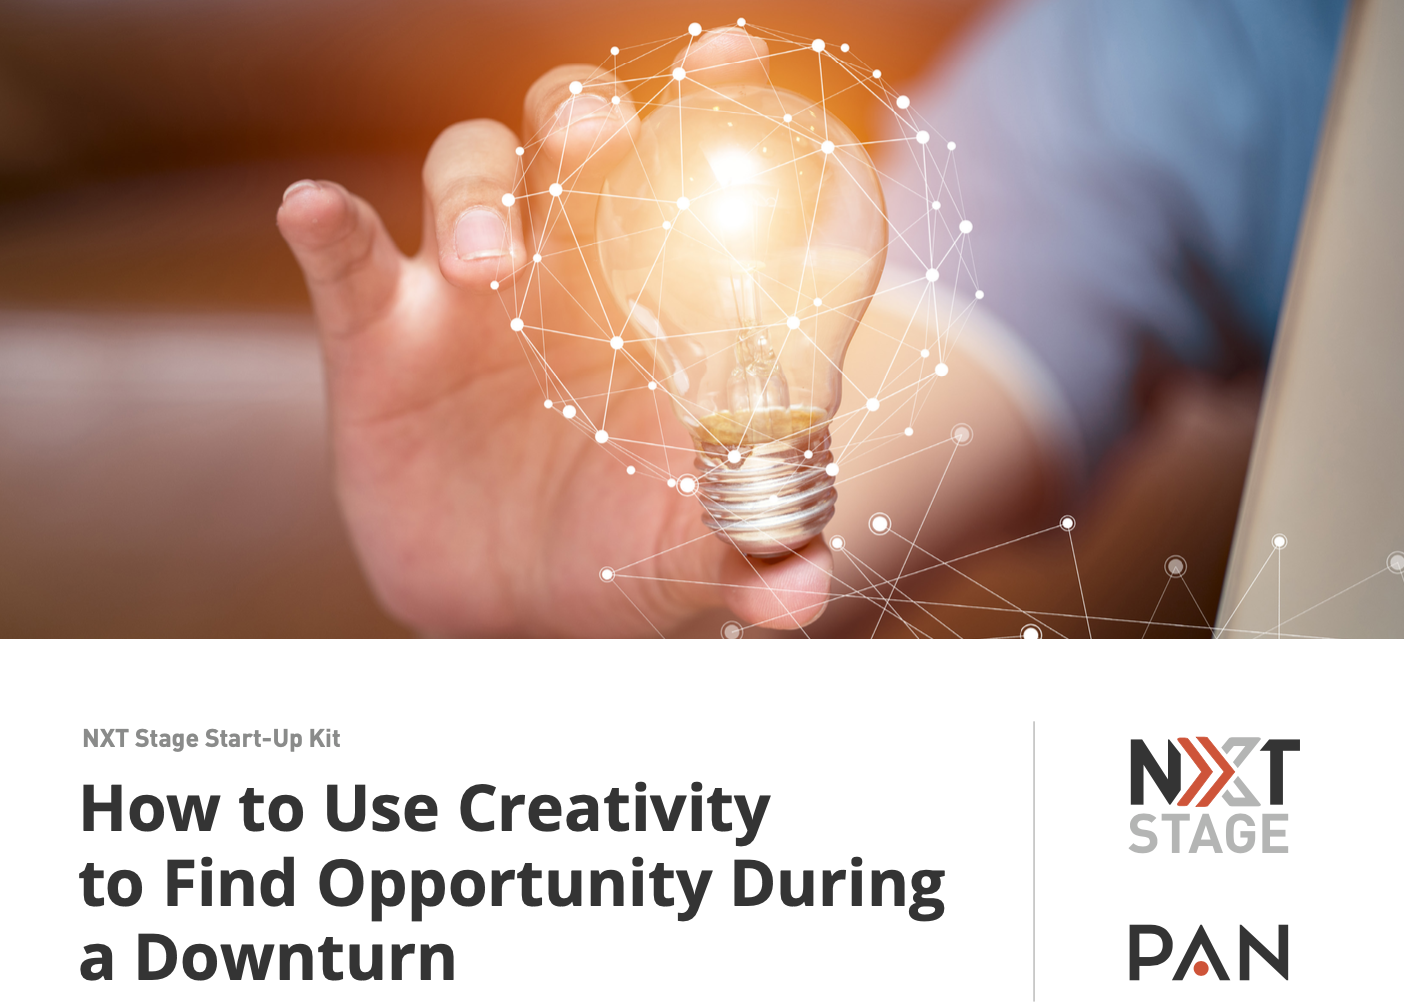 How to Use Creativity to Find Opportunity During a Downturn